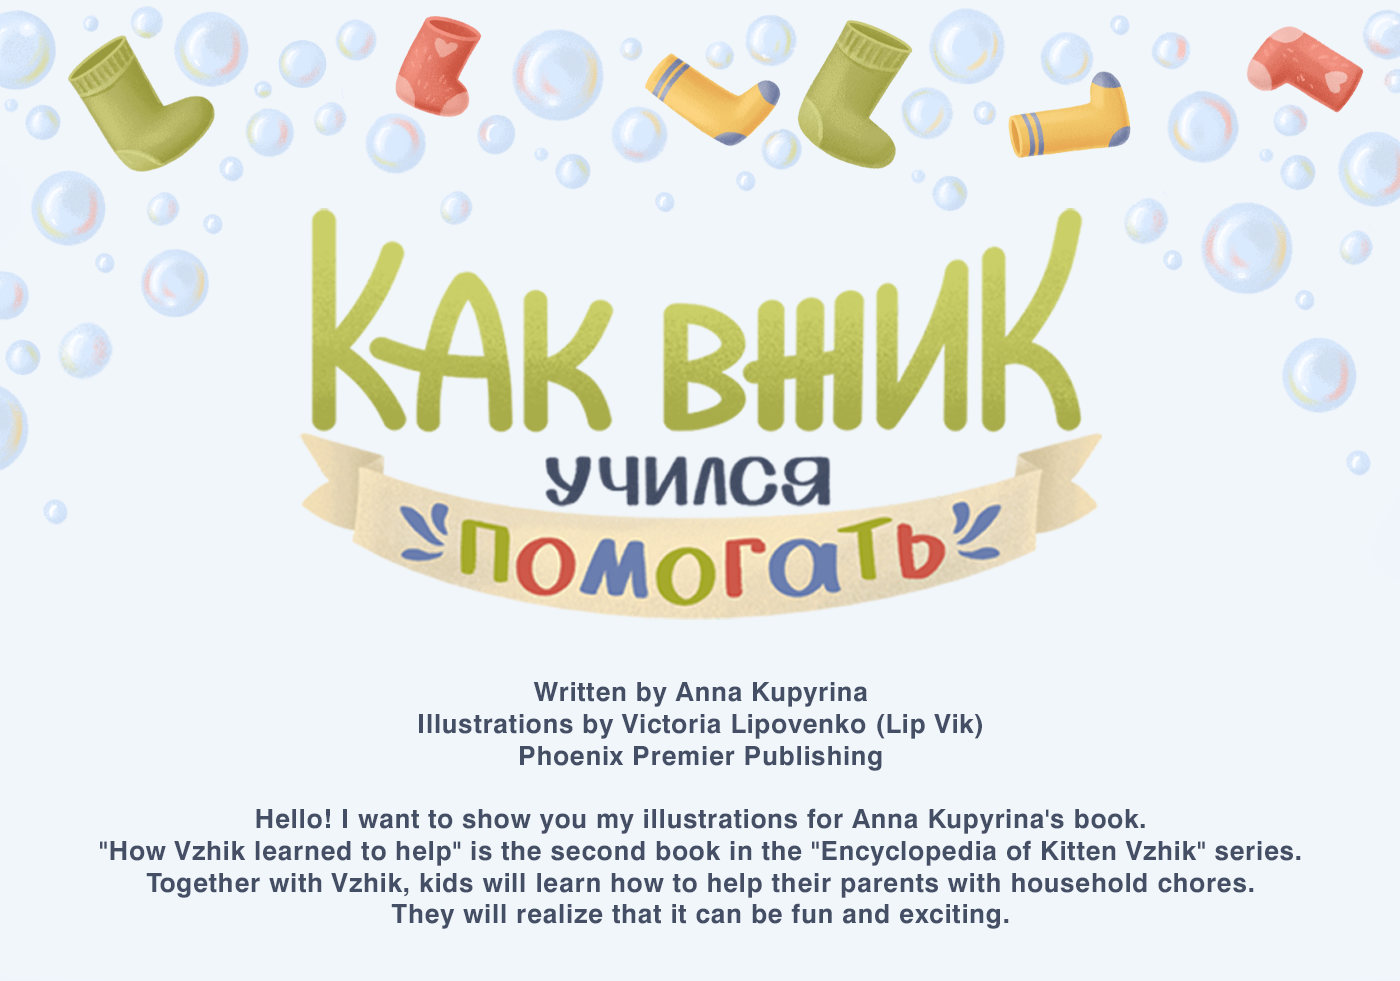 Children's book "How Vzhik learned to help"